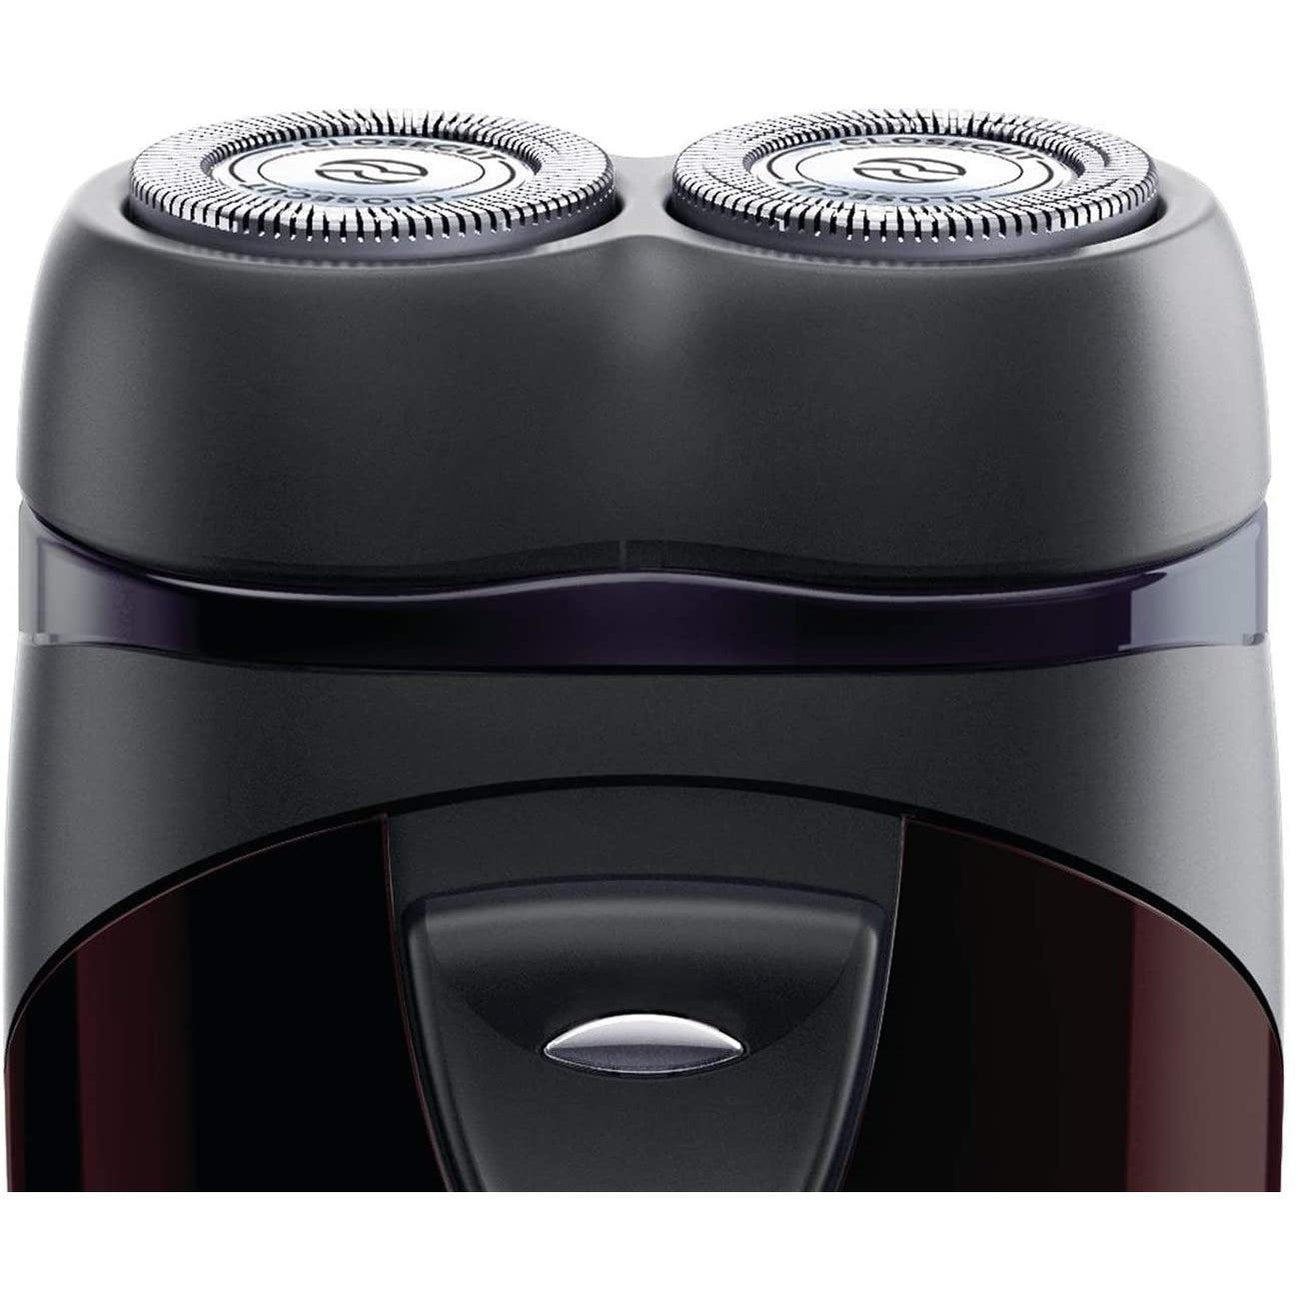 Philips Men's Electric Travel Shaver, Cordless, Battery-Powered - PQ206/18 - Healthxpress.ie